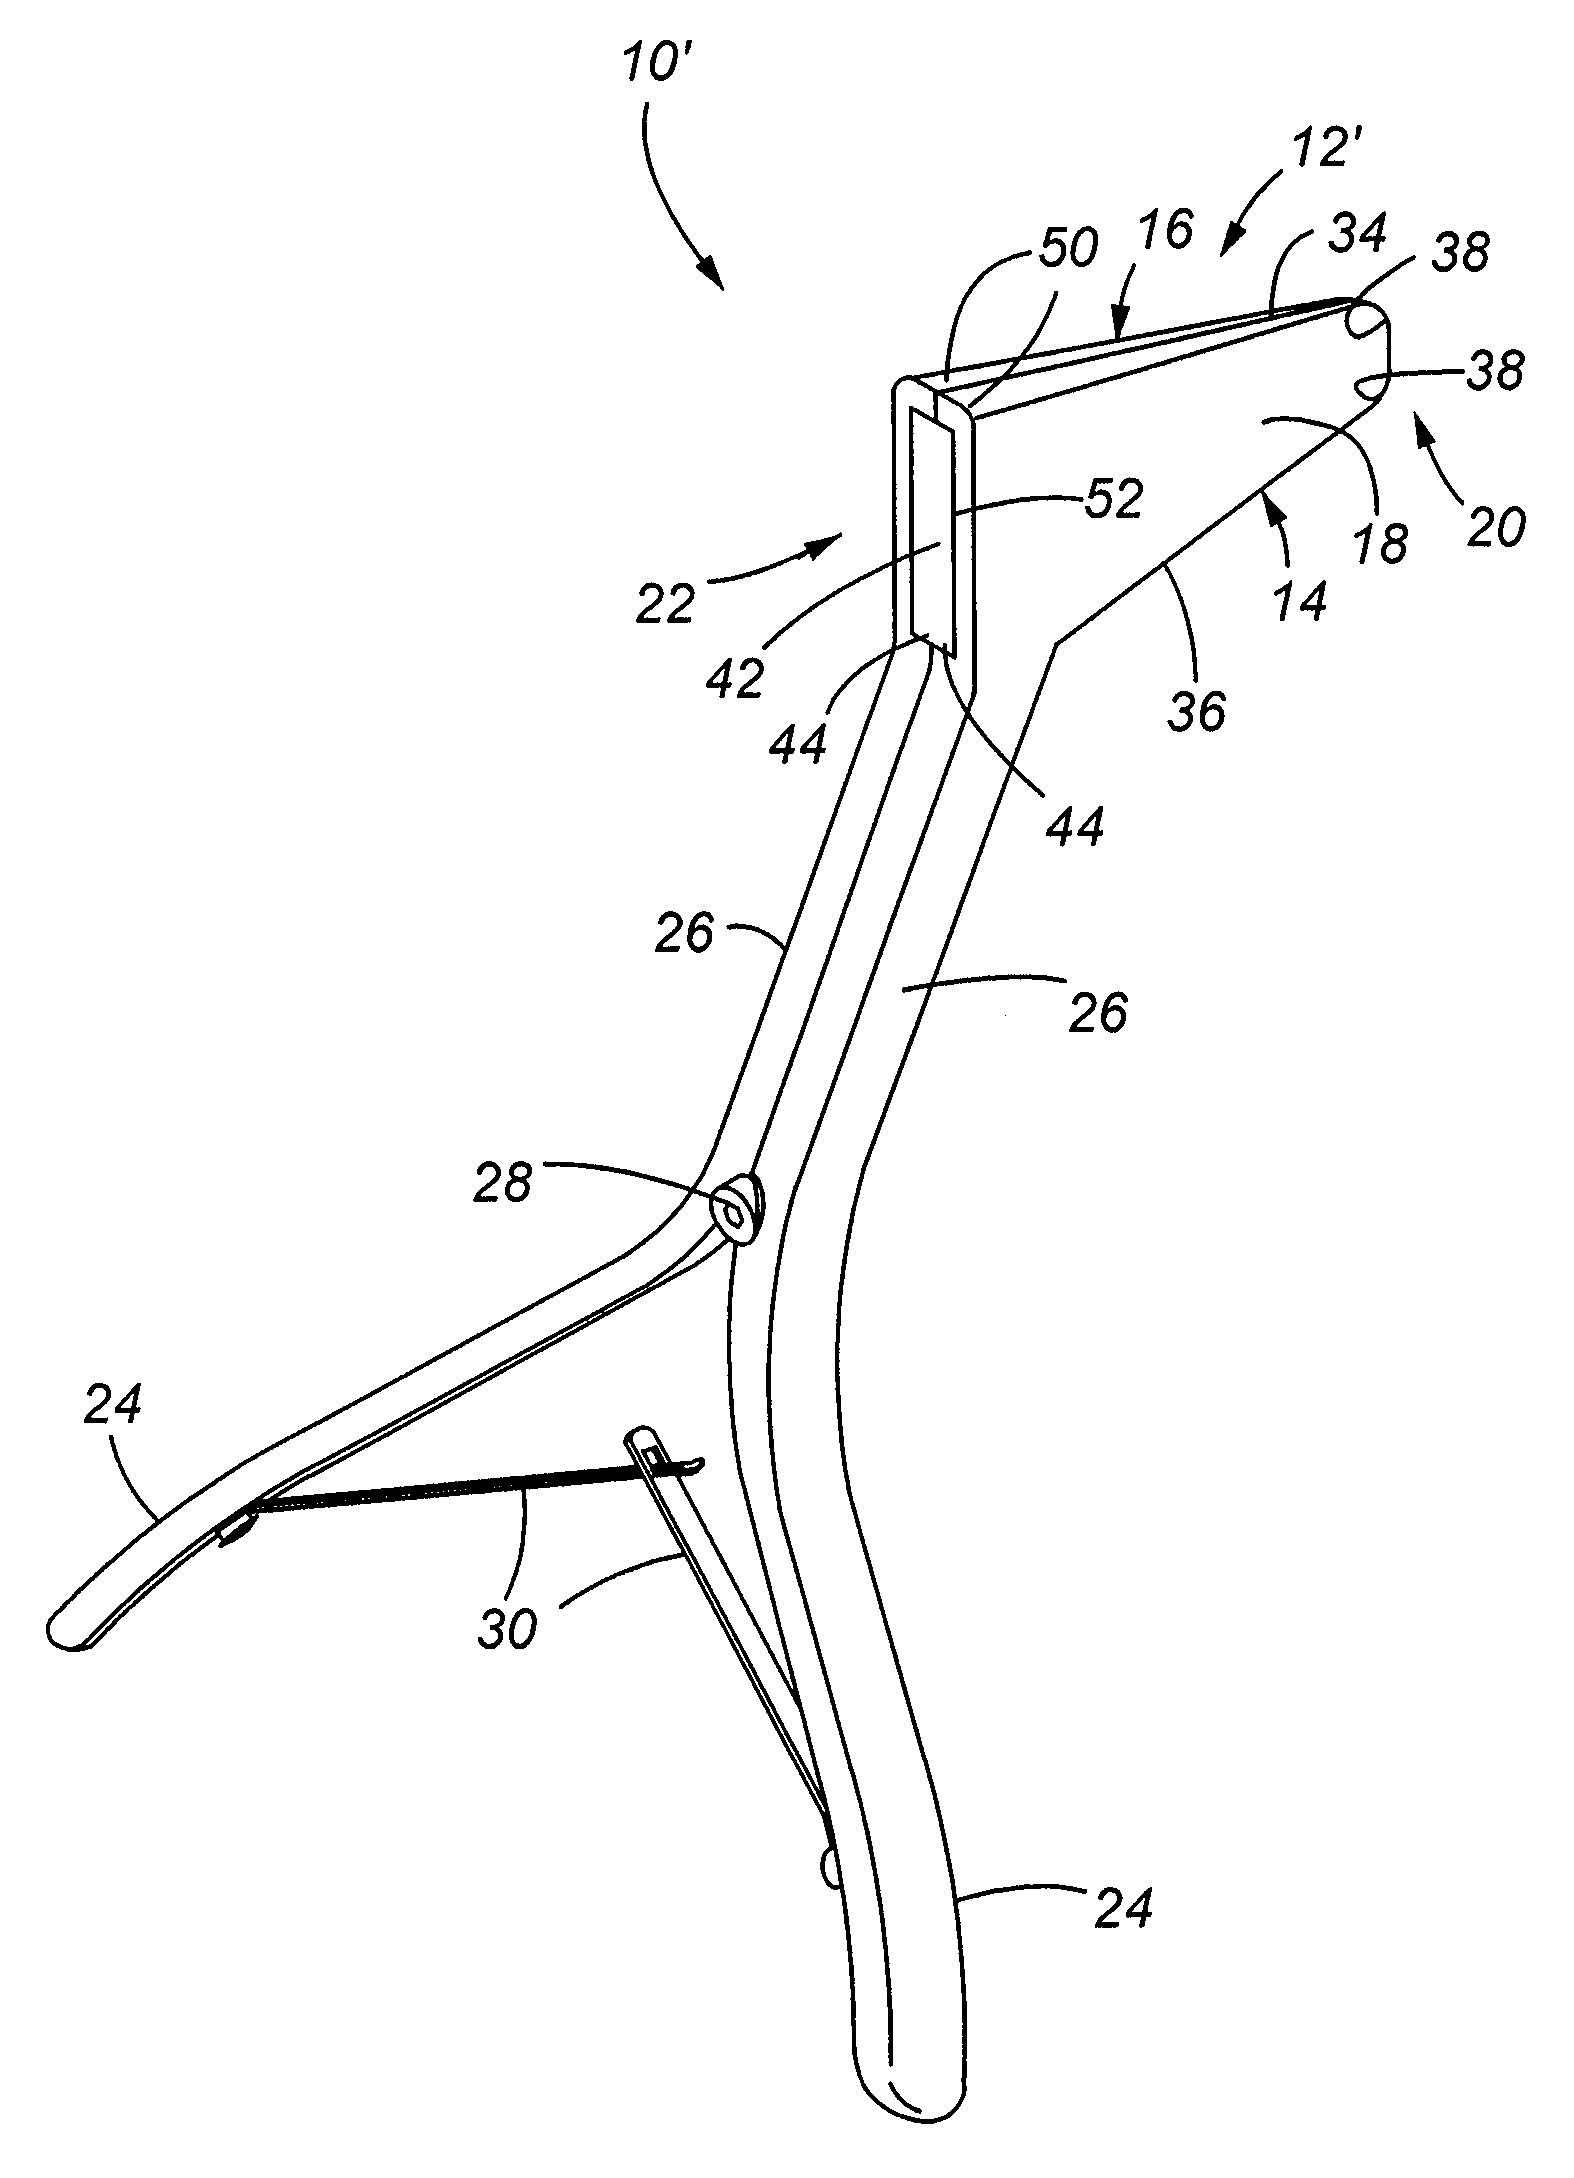 Intermuscular guide for retractor insertion and method of use